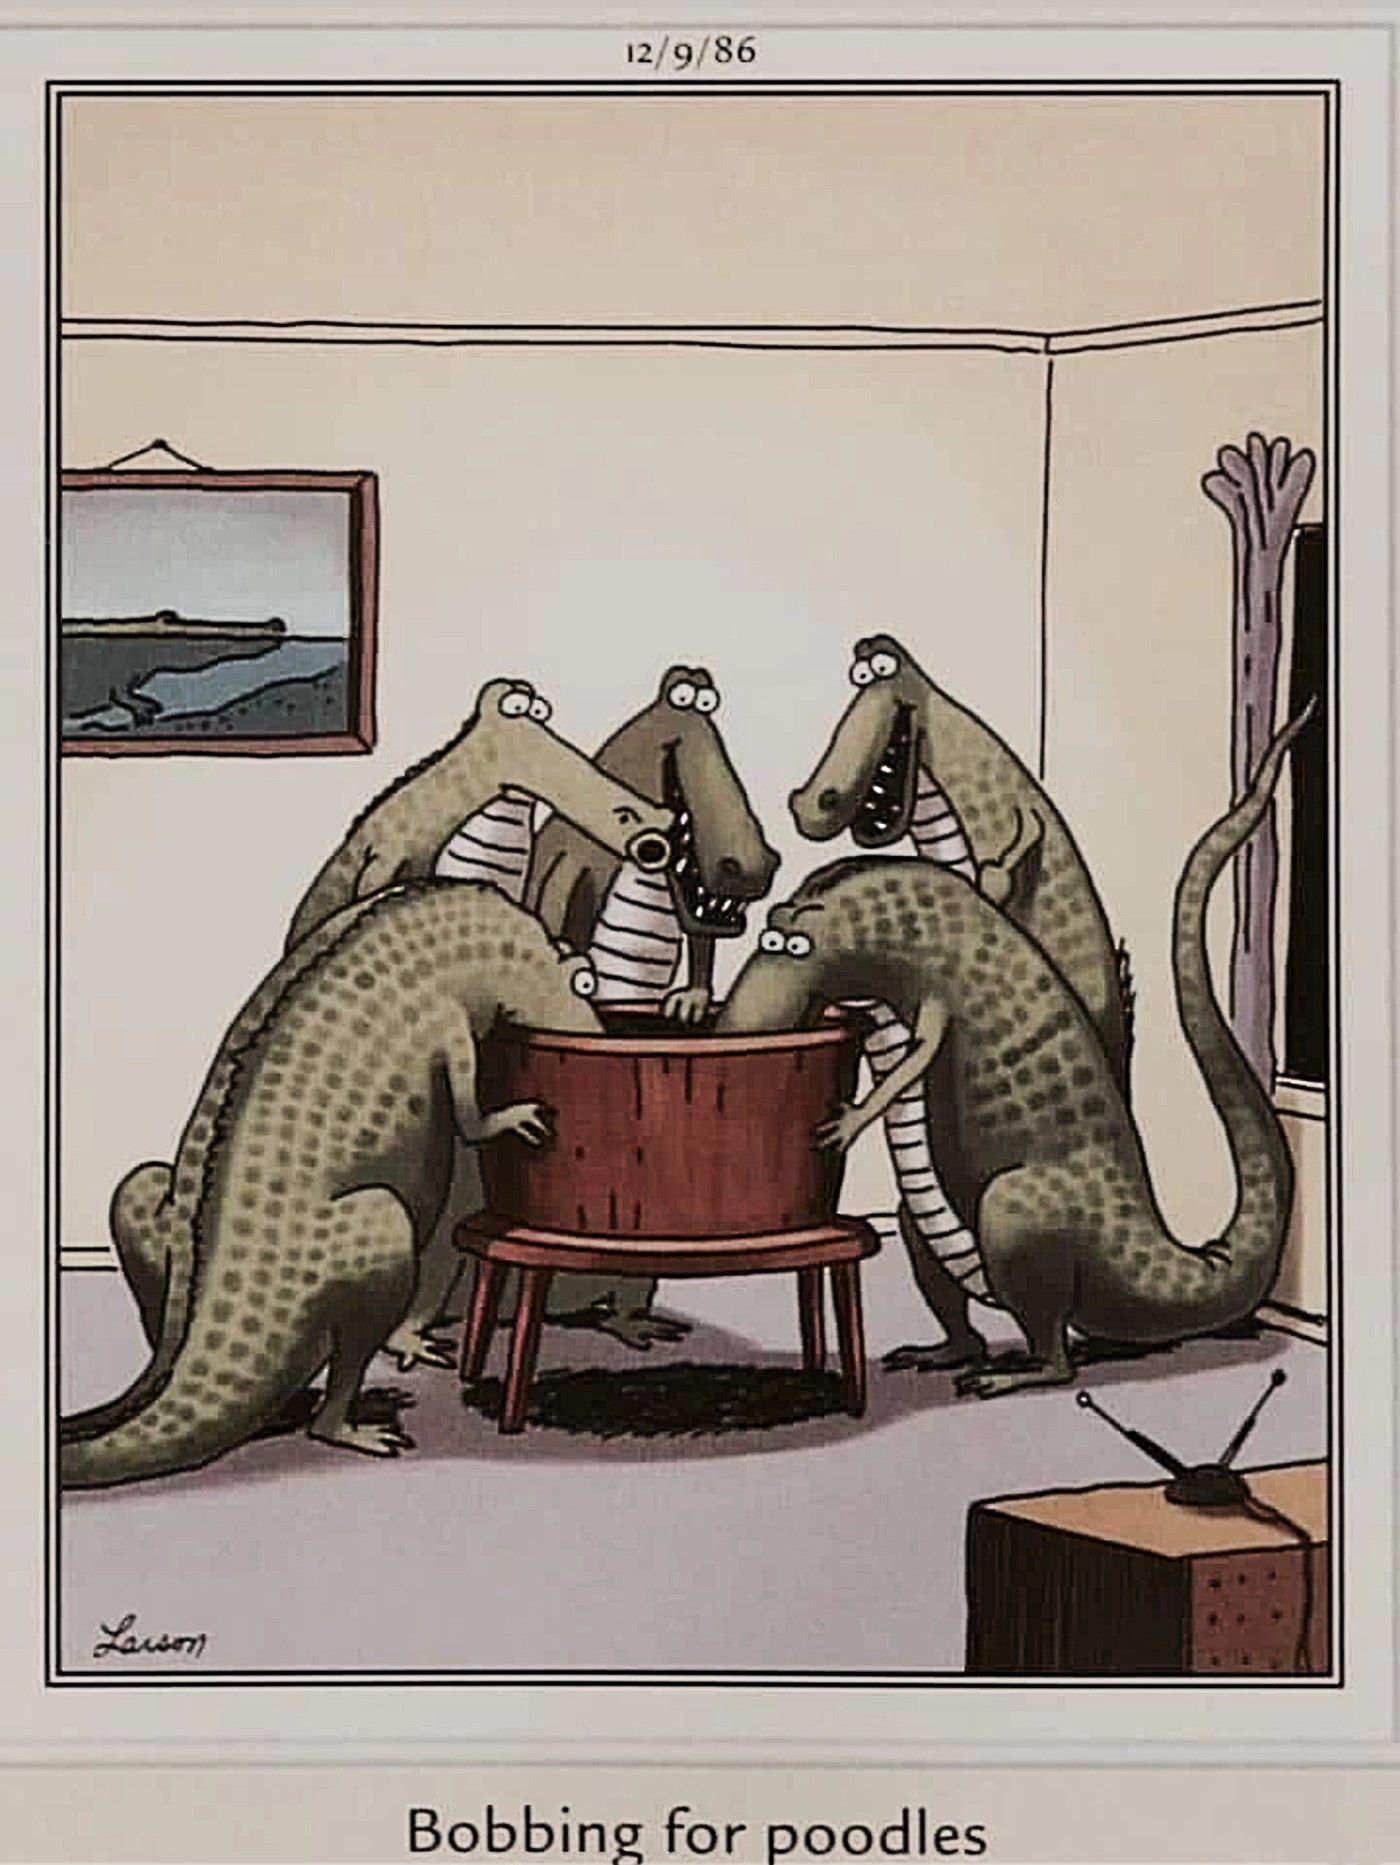 The Far Side, alligators playing 'bobbing for poodles' in infamous strip